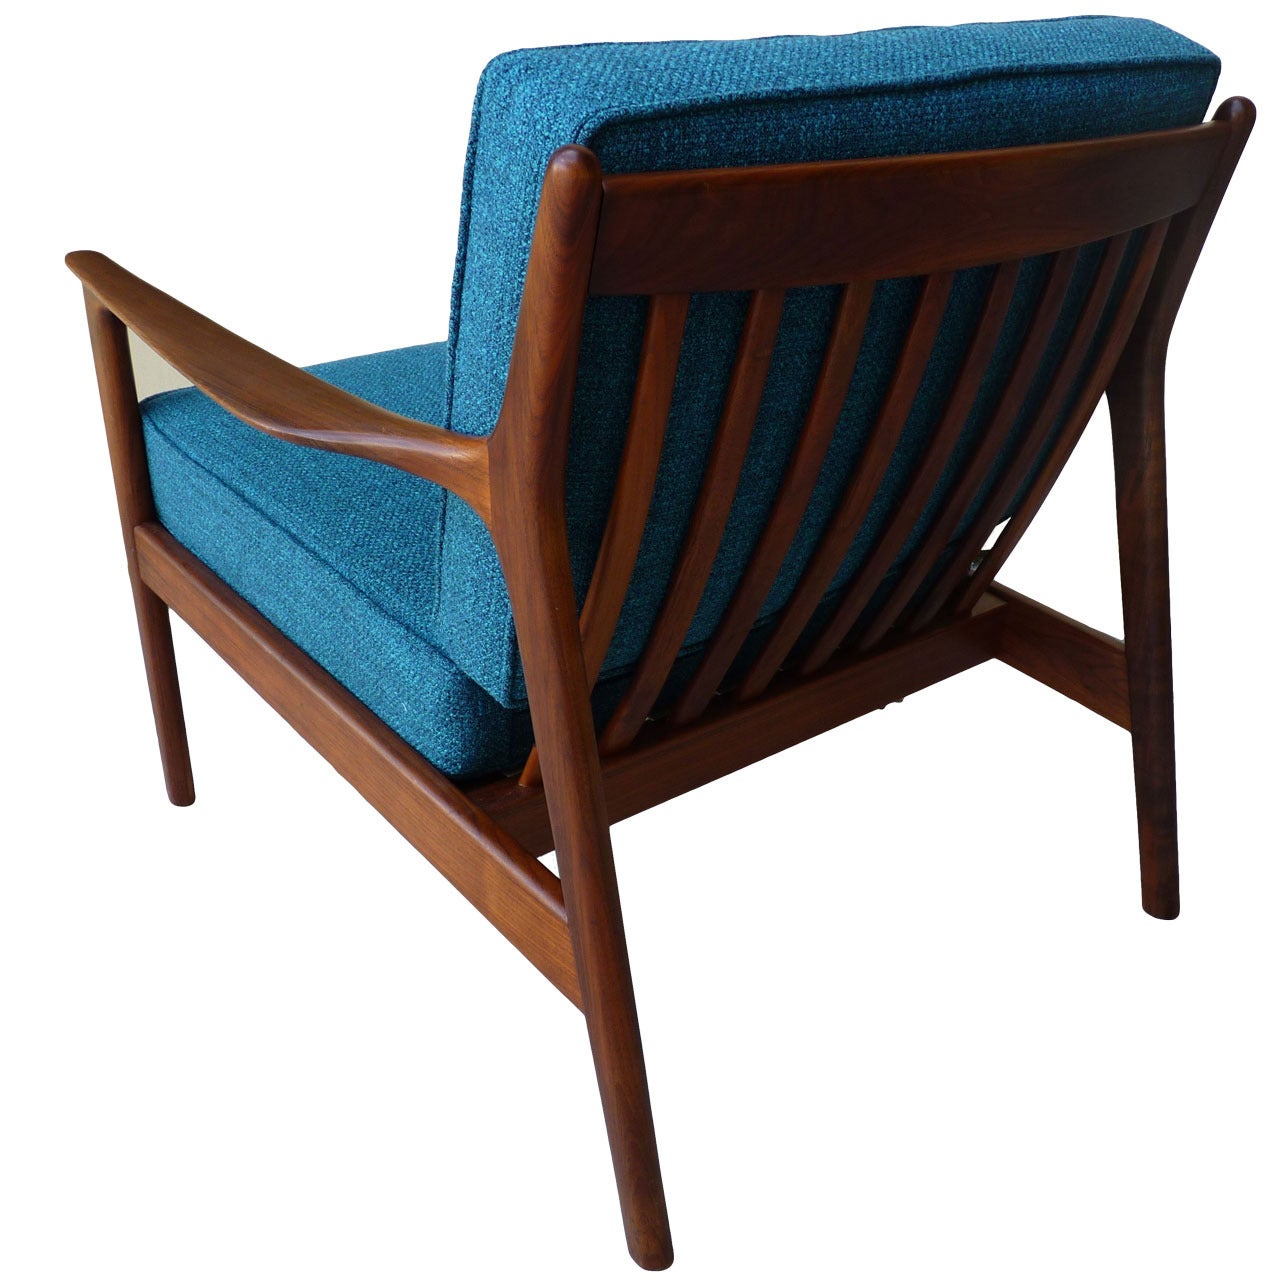 Walnut Lounge Chair by Folke Ohlsson for DUX